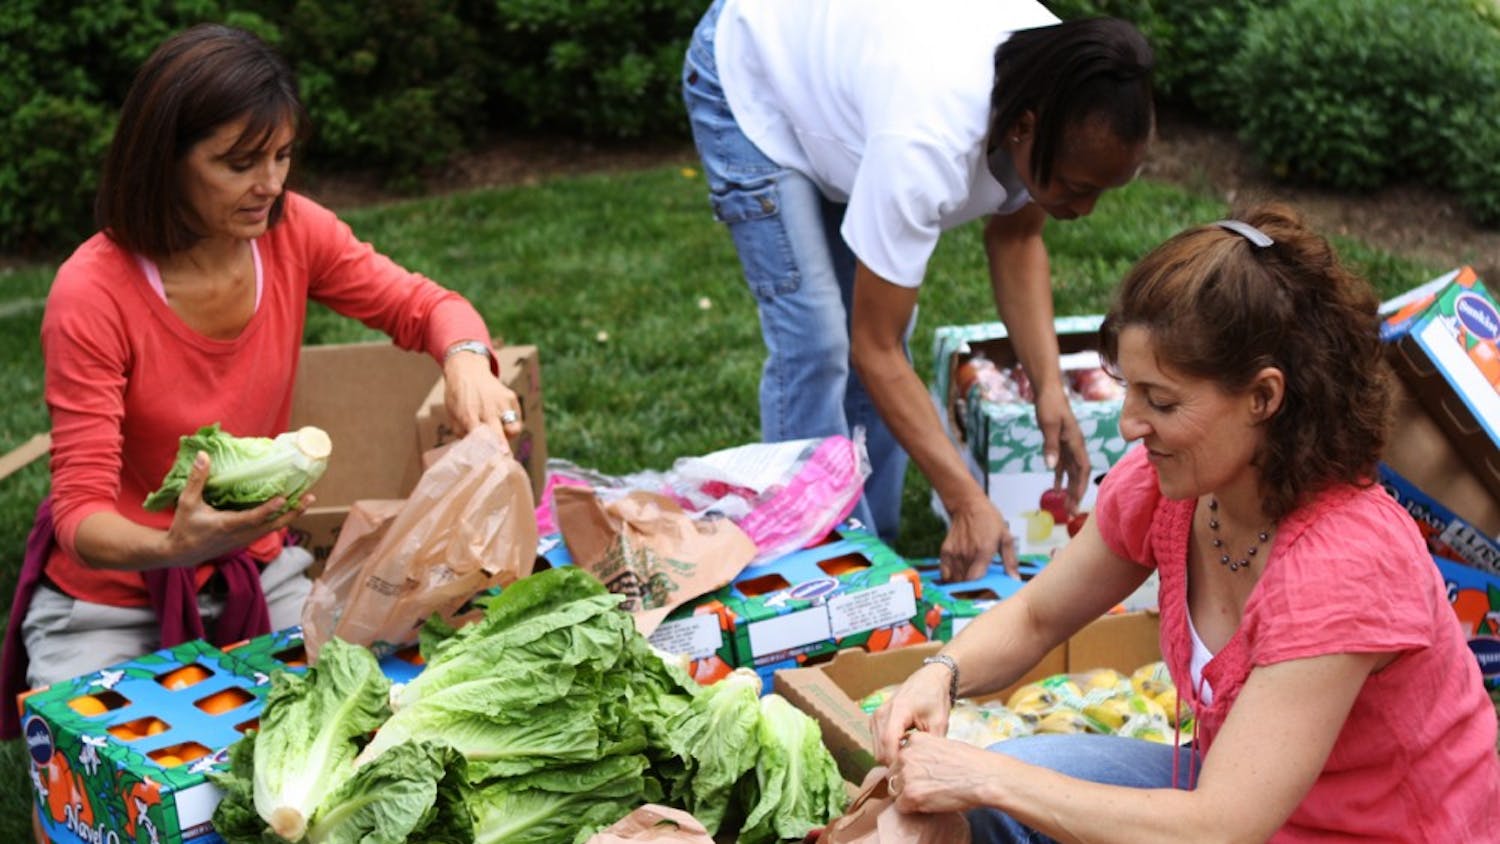 Photo: Food for Families donates goods to needy Chapel Hill-Carrboro families (Erin Hull)